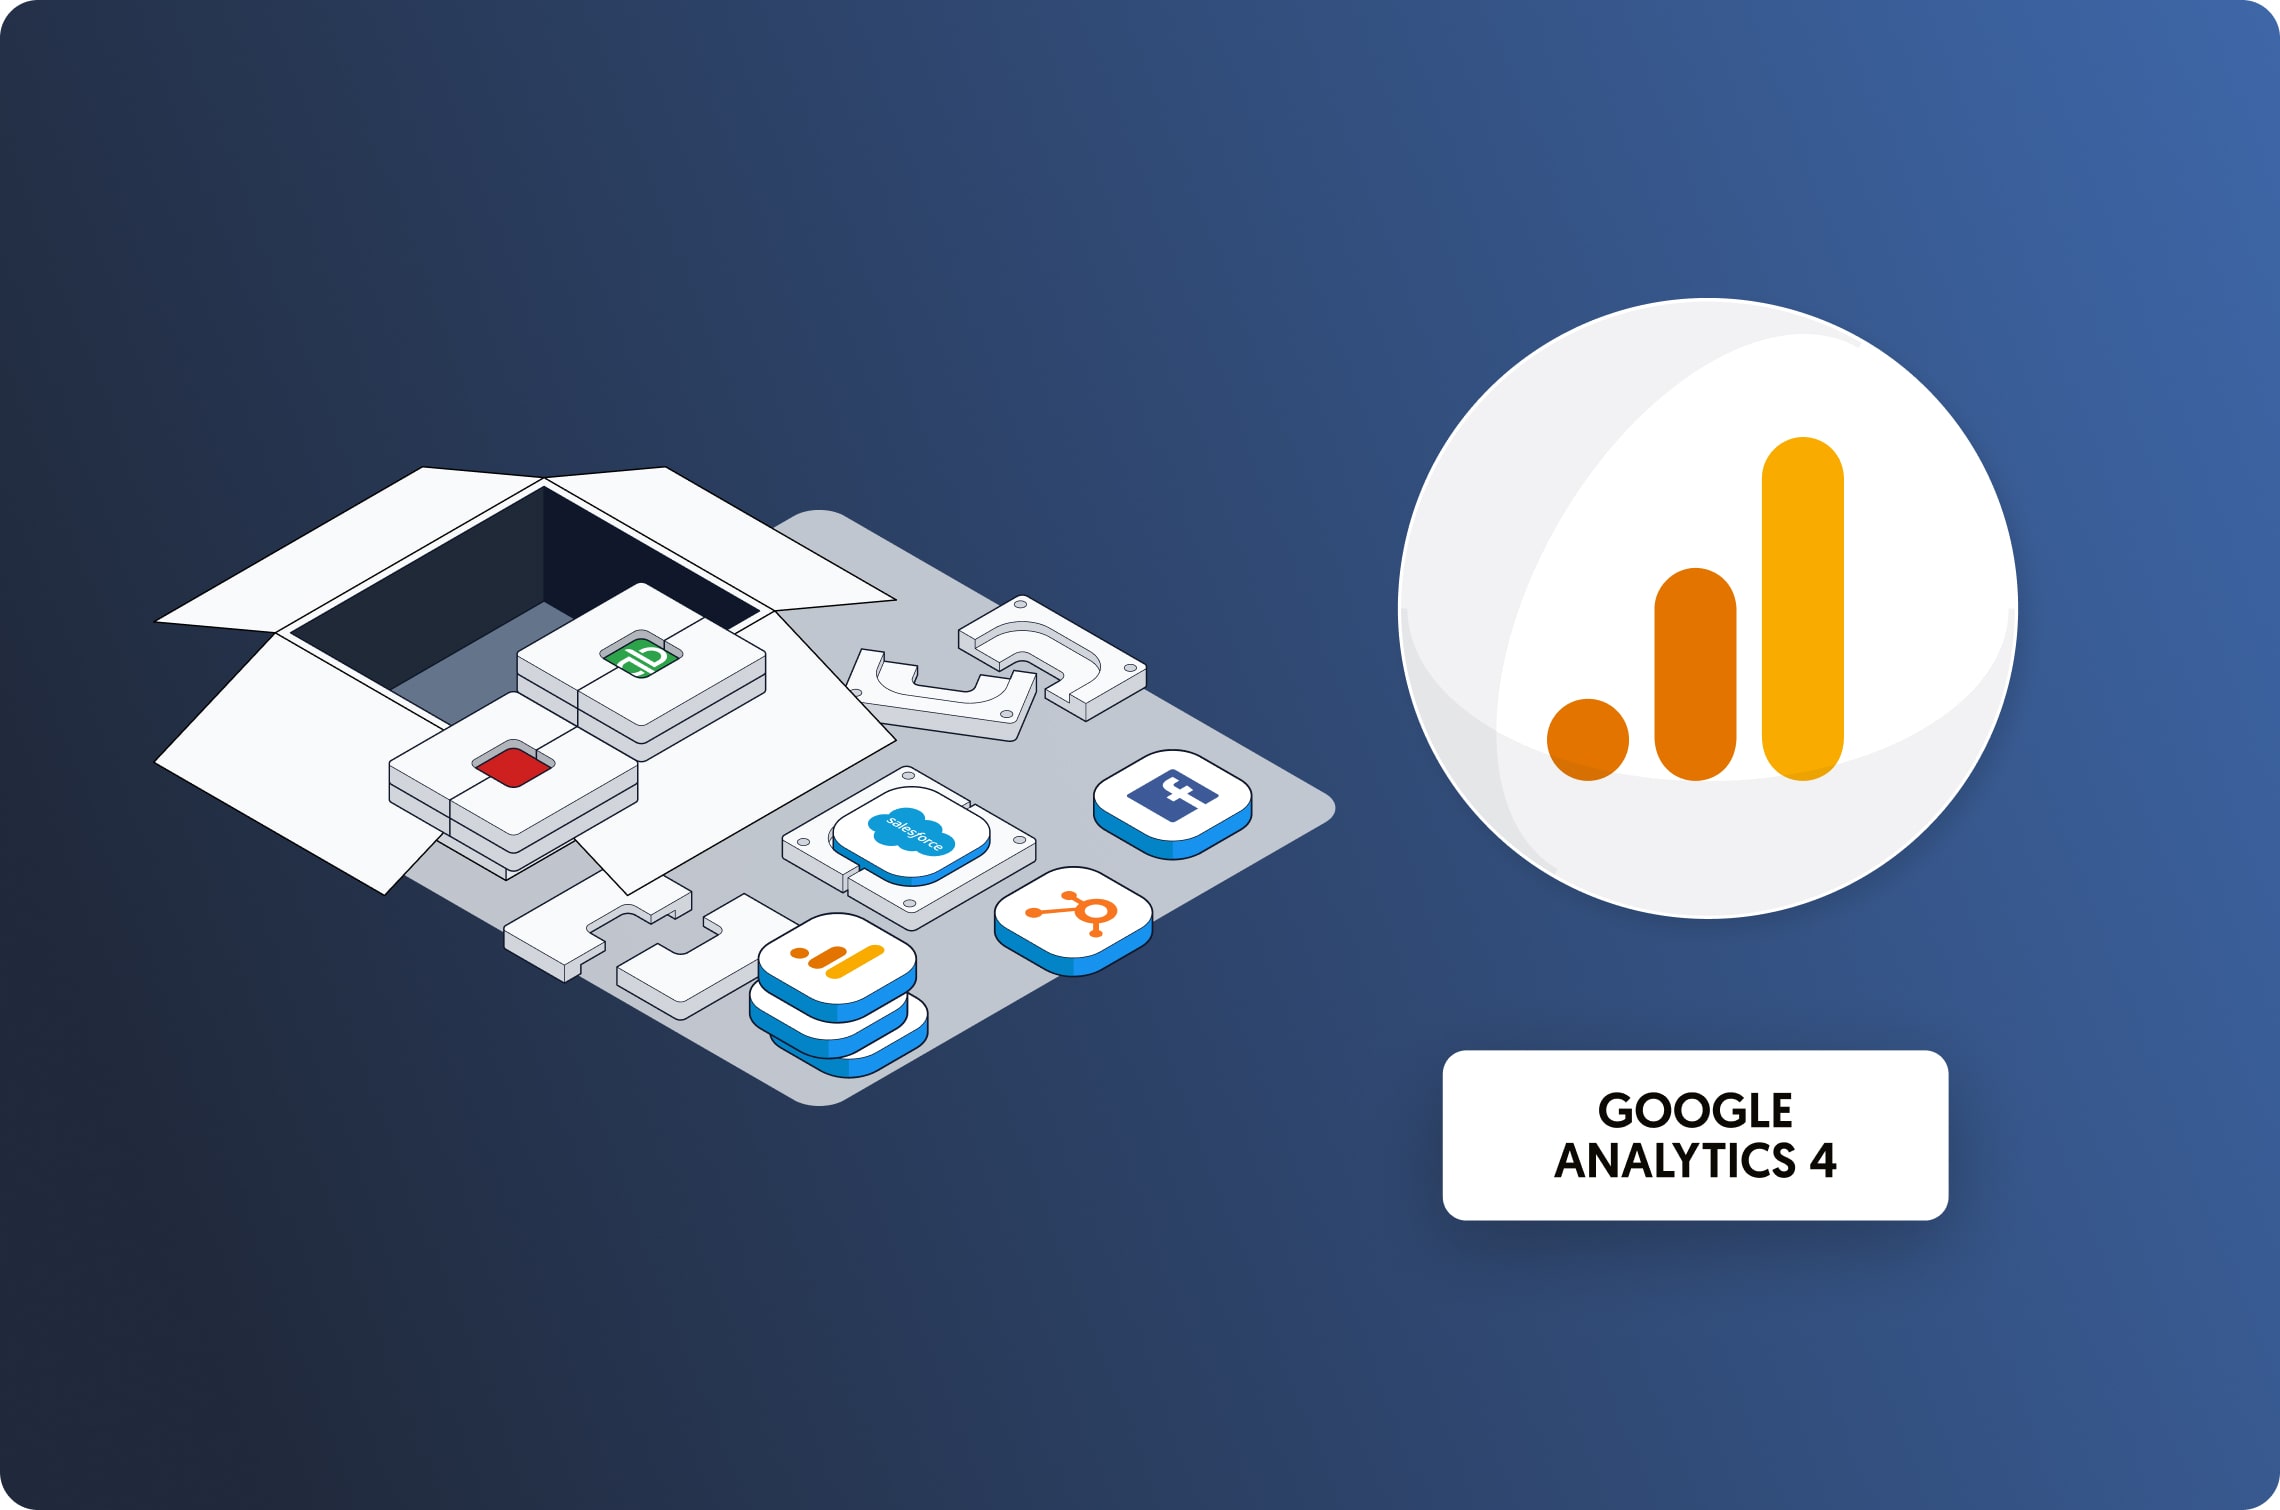 How to Connect Google Analytics 4 to any Warehouse or BI tool